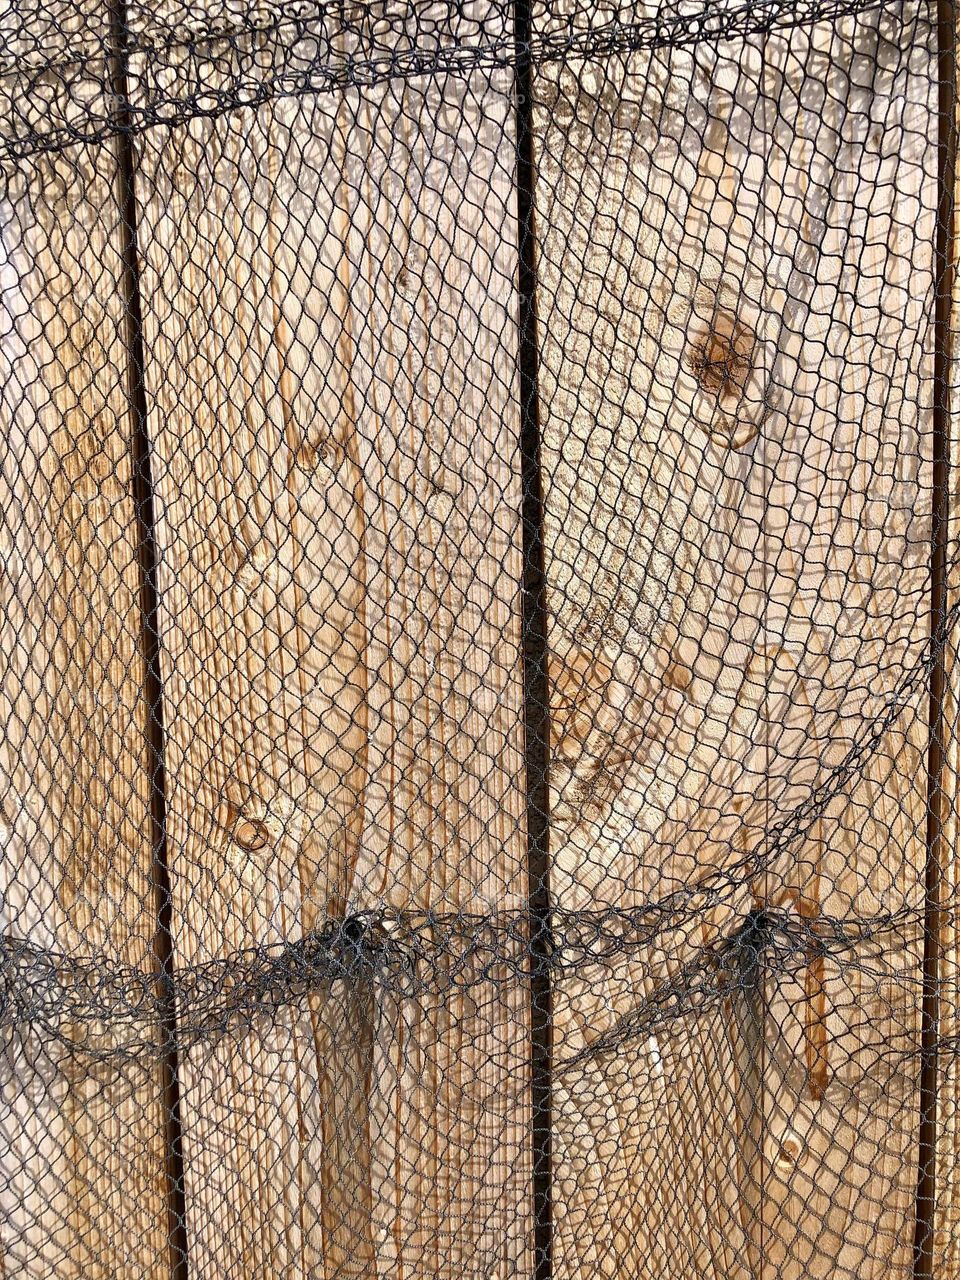 Plank of wood and fish net / Texture / 🇫🇷